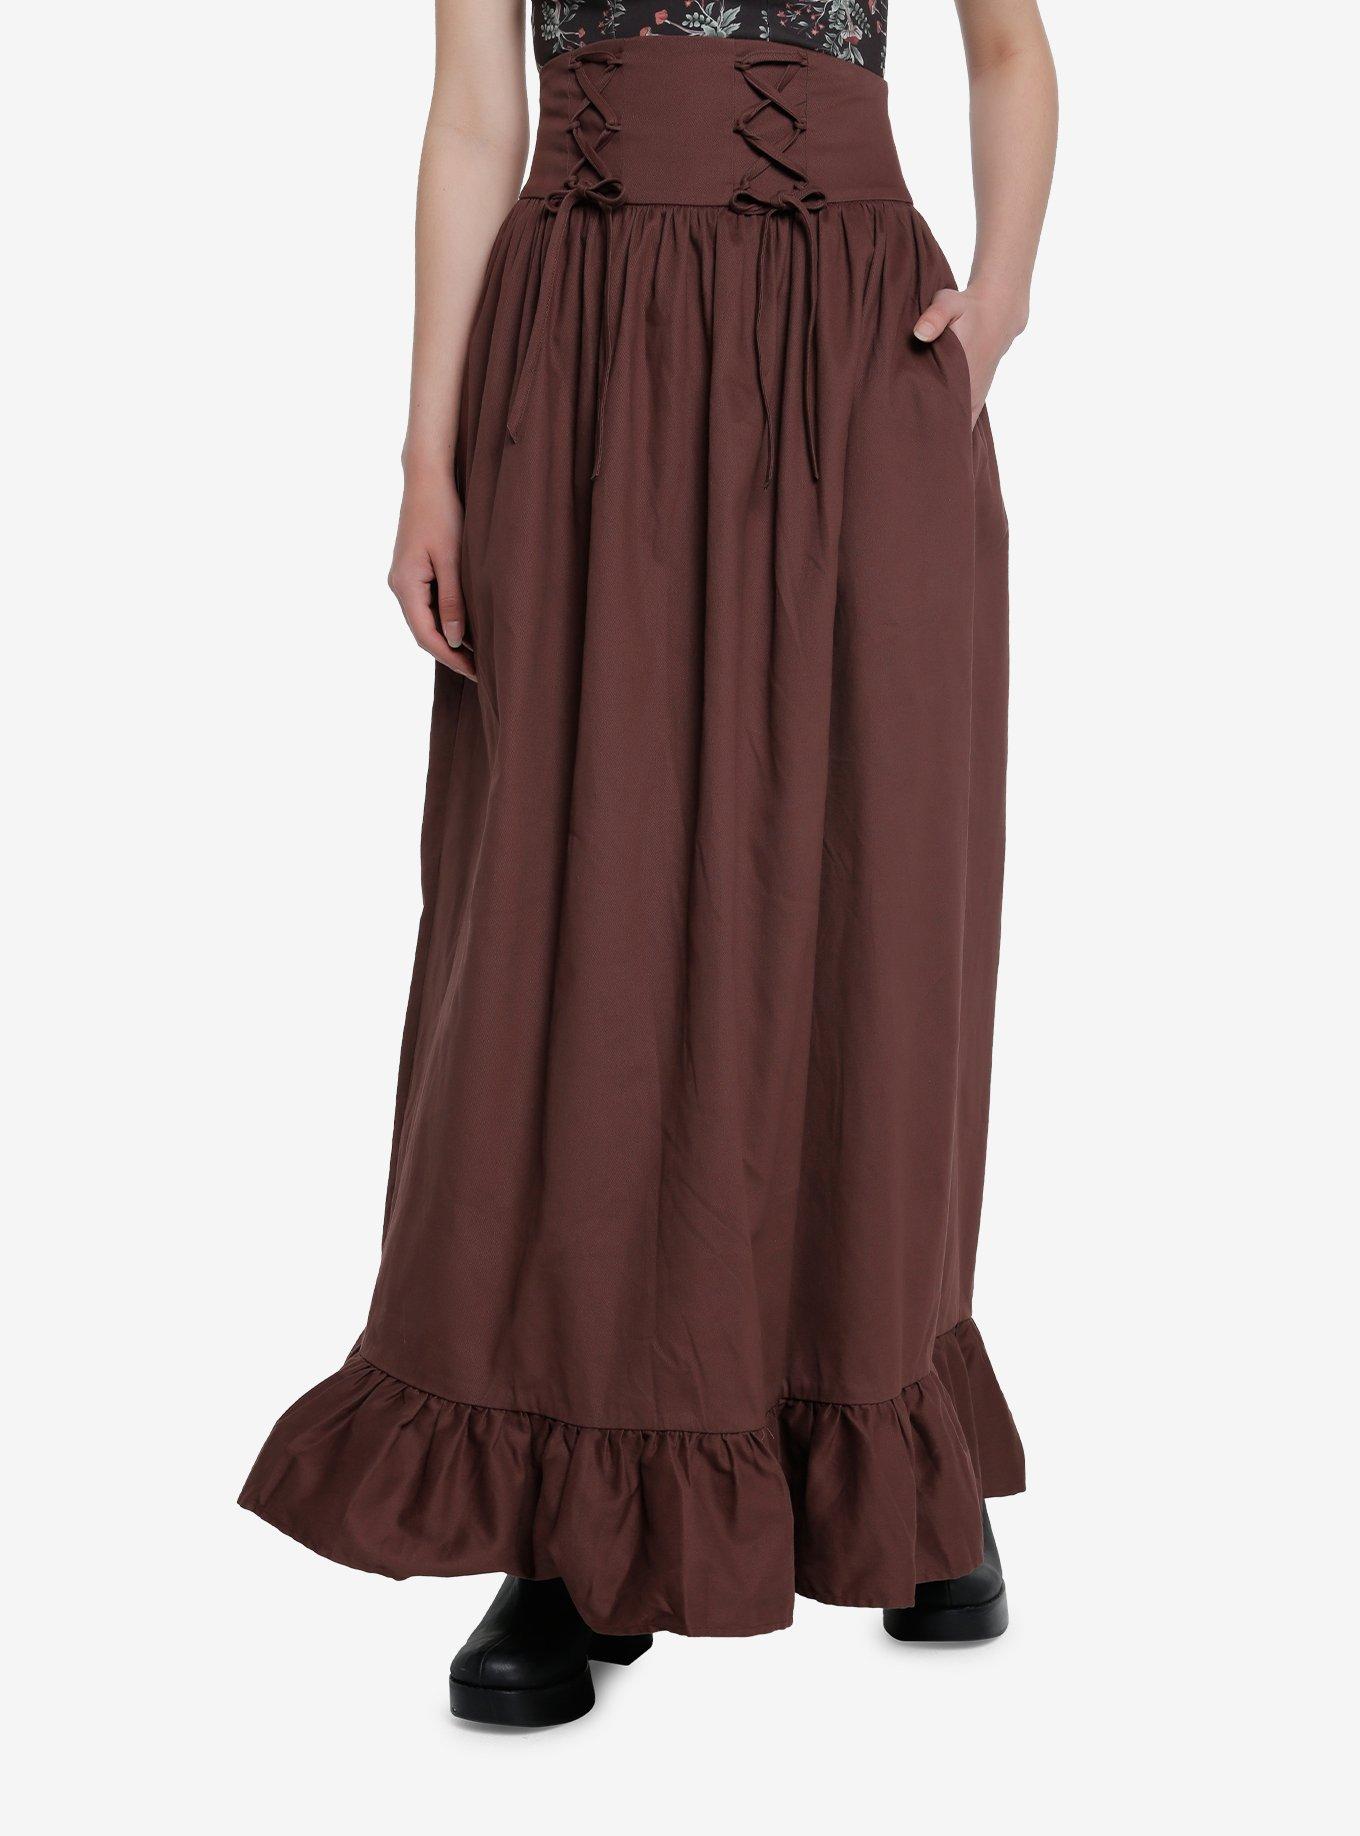 Thorn & Fable Brown Lace-Up Maxi Skirt, BROWN, hi-res